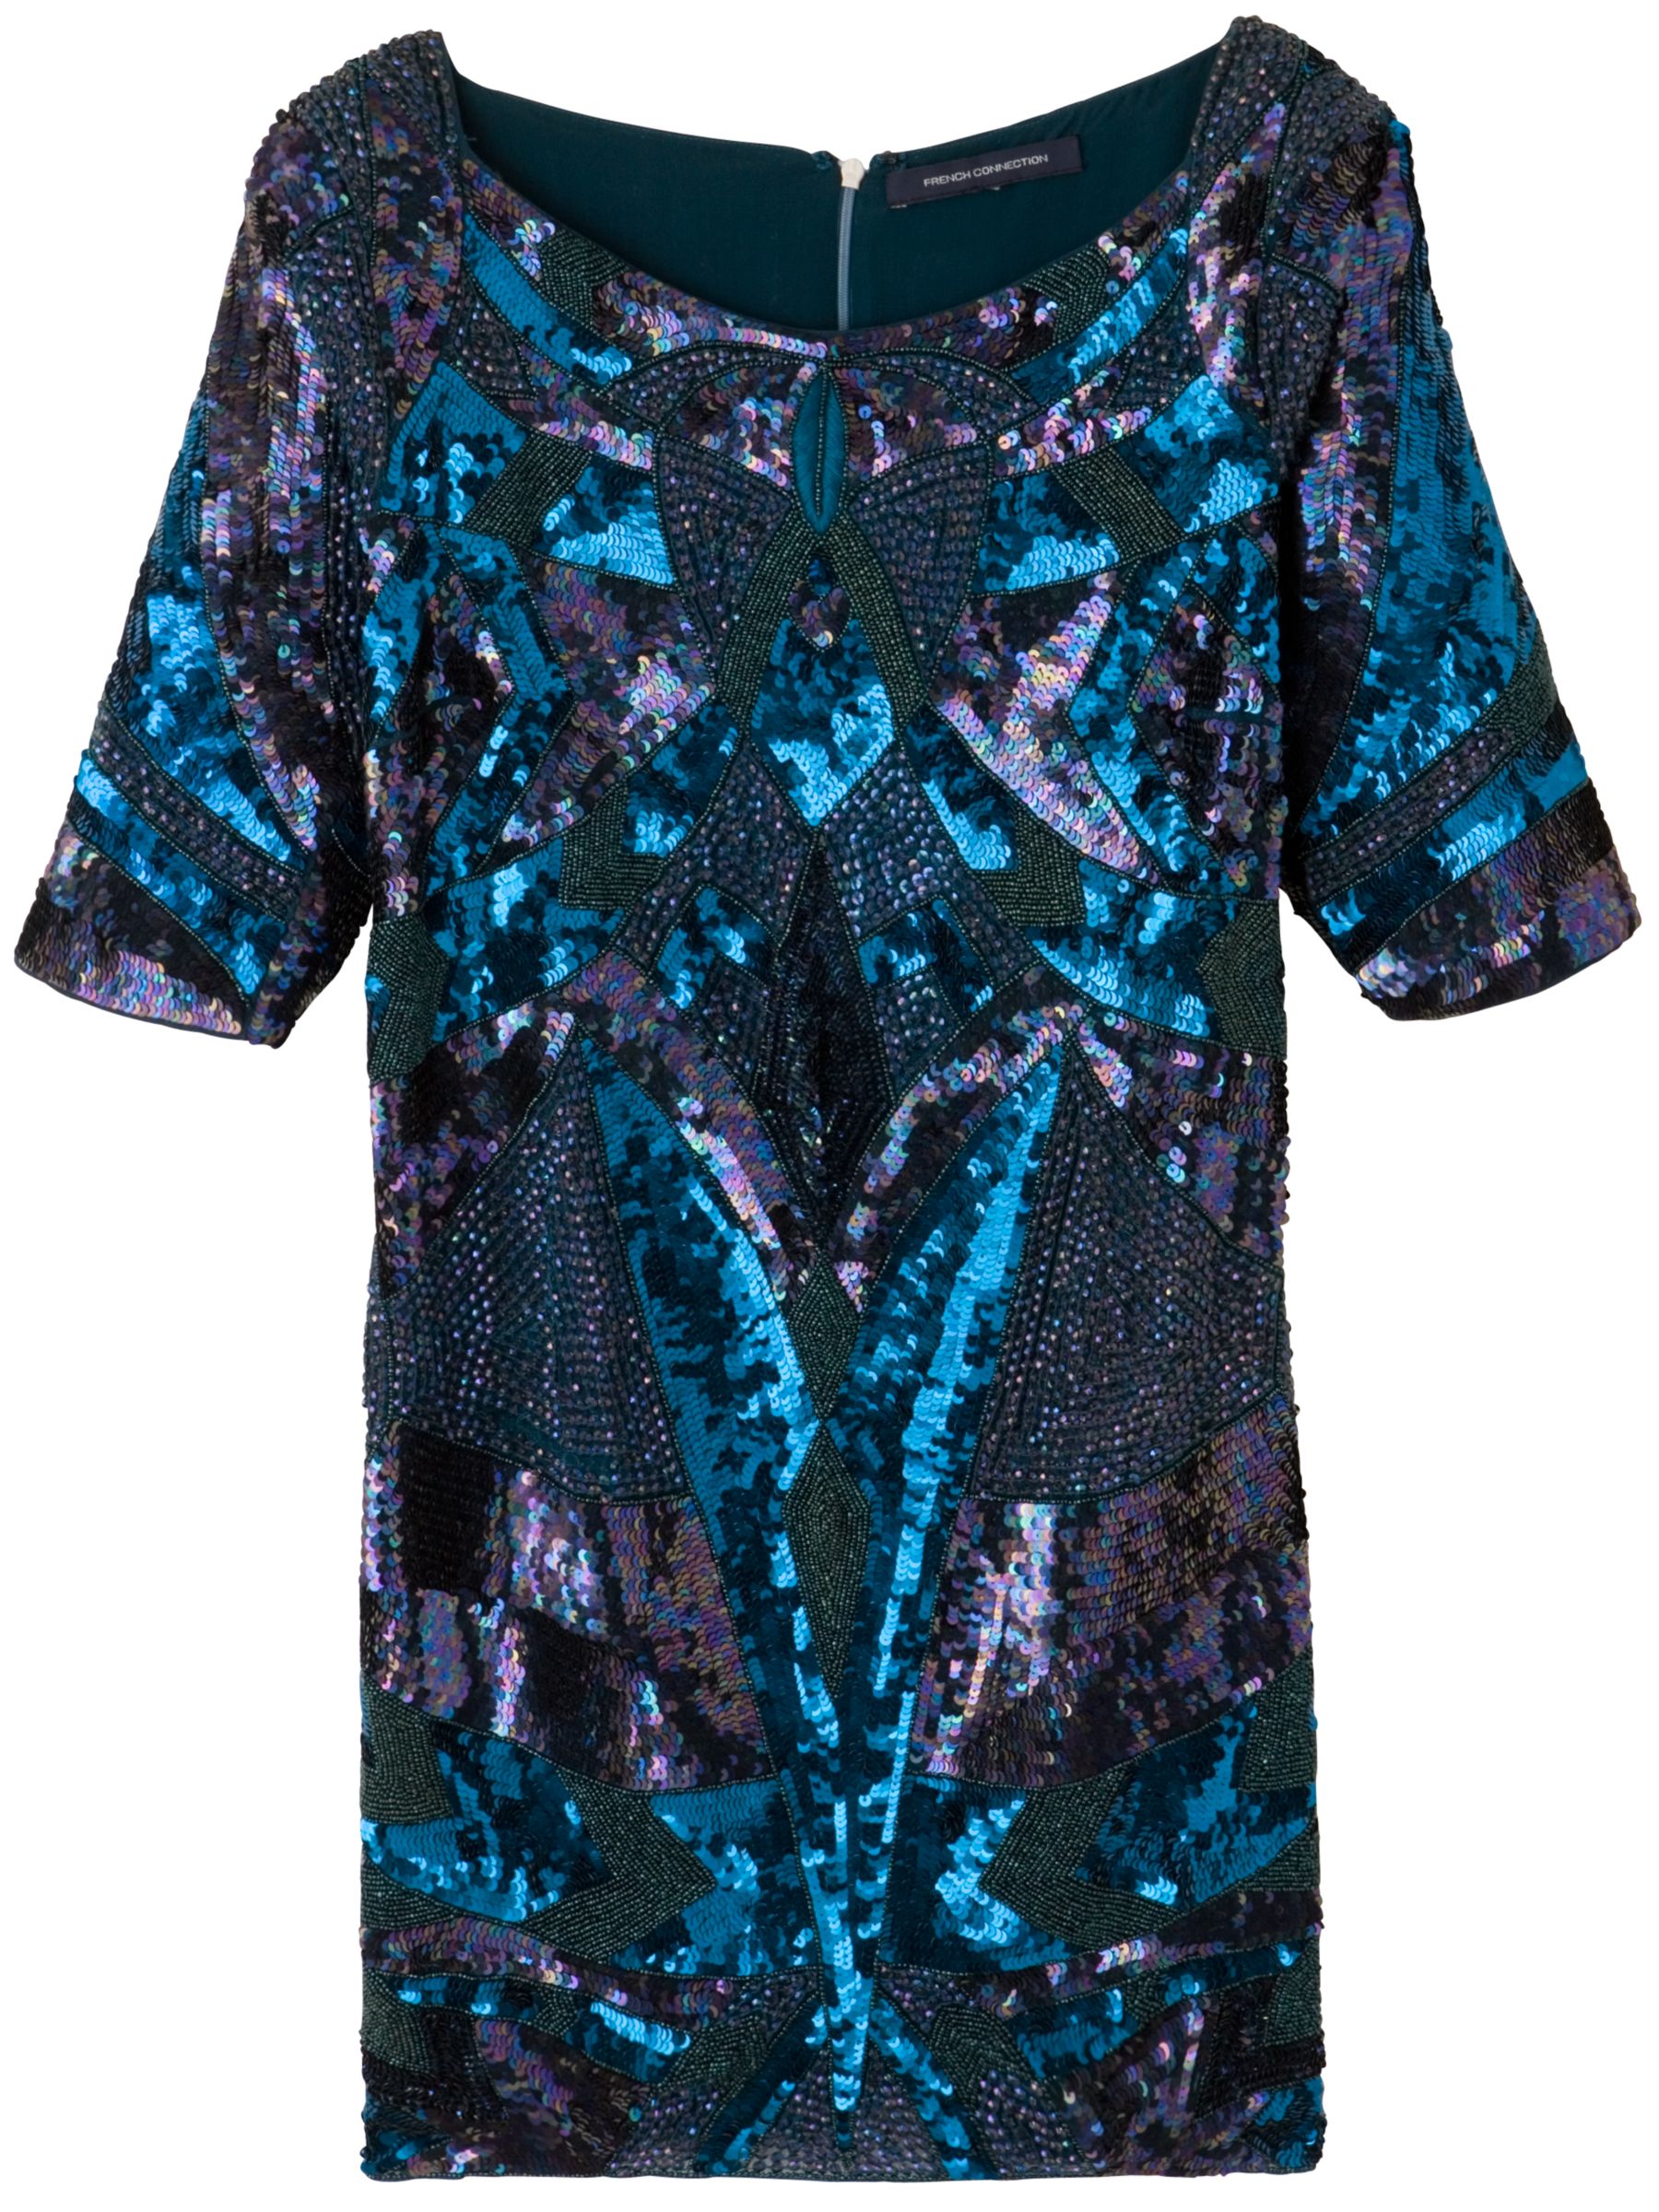 French Connection Sequin Spirit Dress, Gracie Green at John Lewis